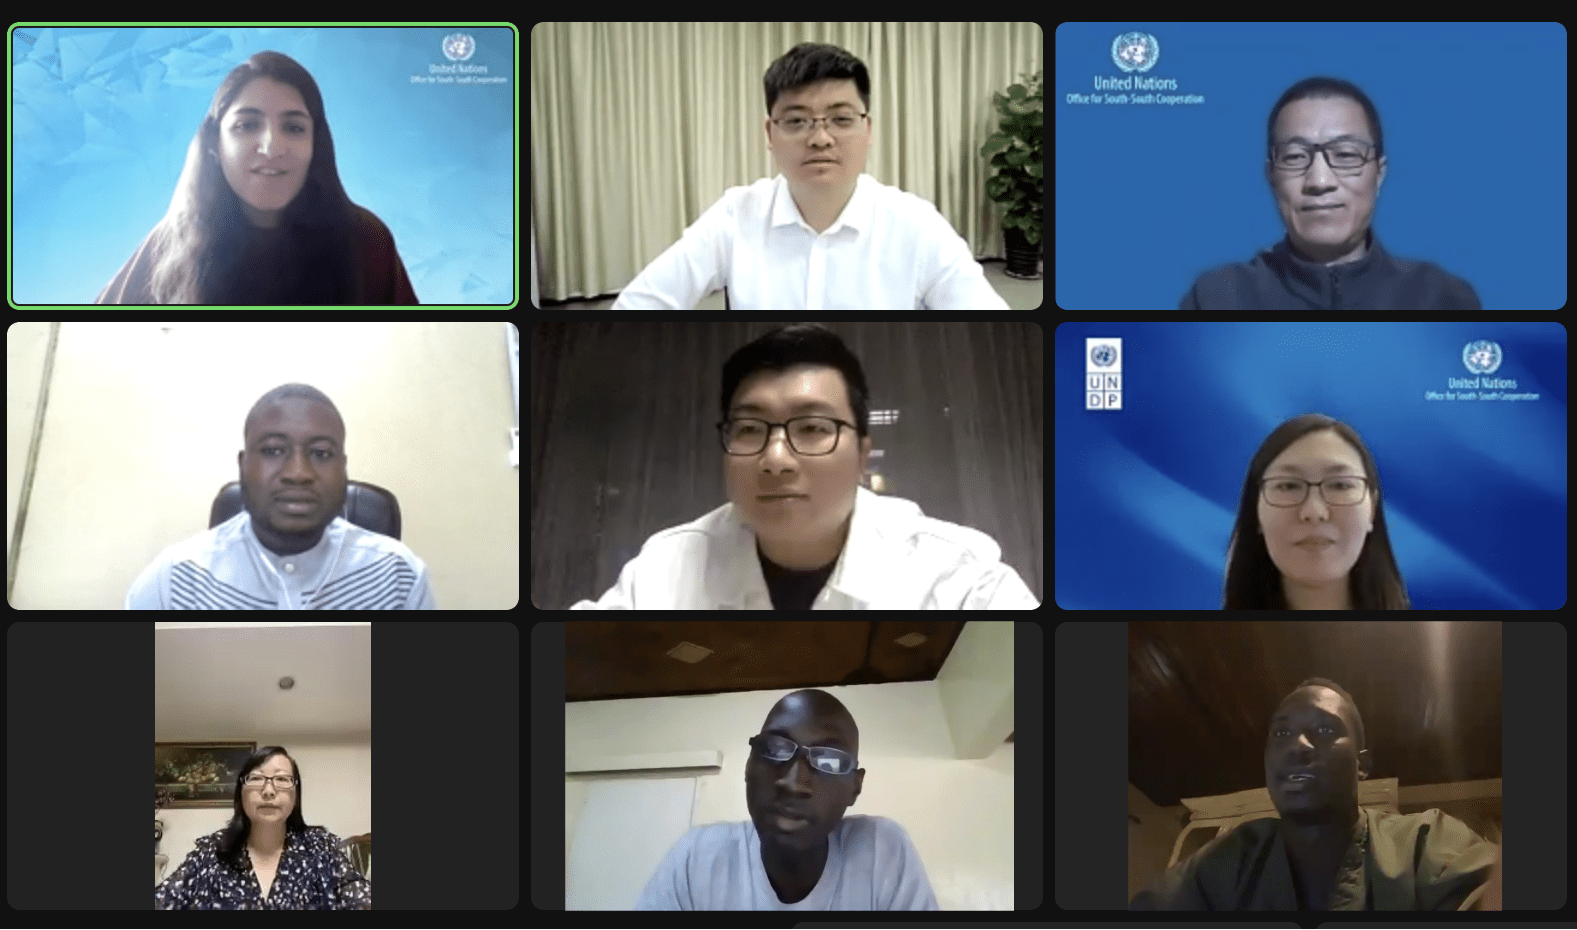 Shenzhen, China and Banjul, the Gambia Exchanges on Youth Volunteerism and Digital Platforms